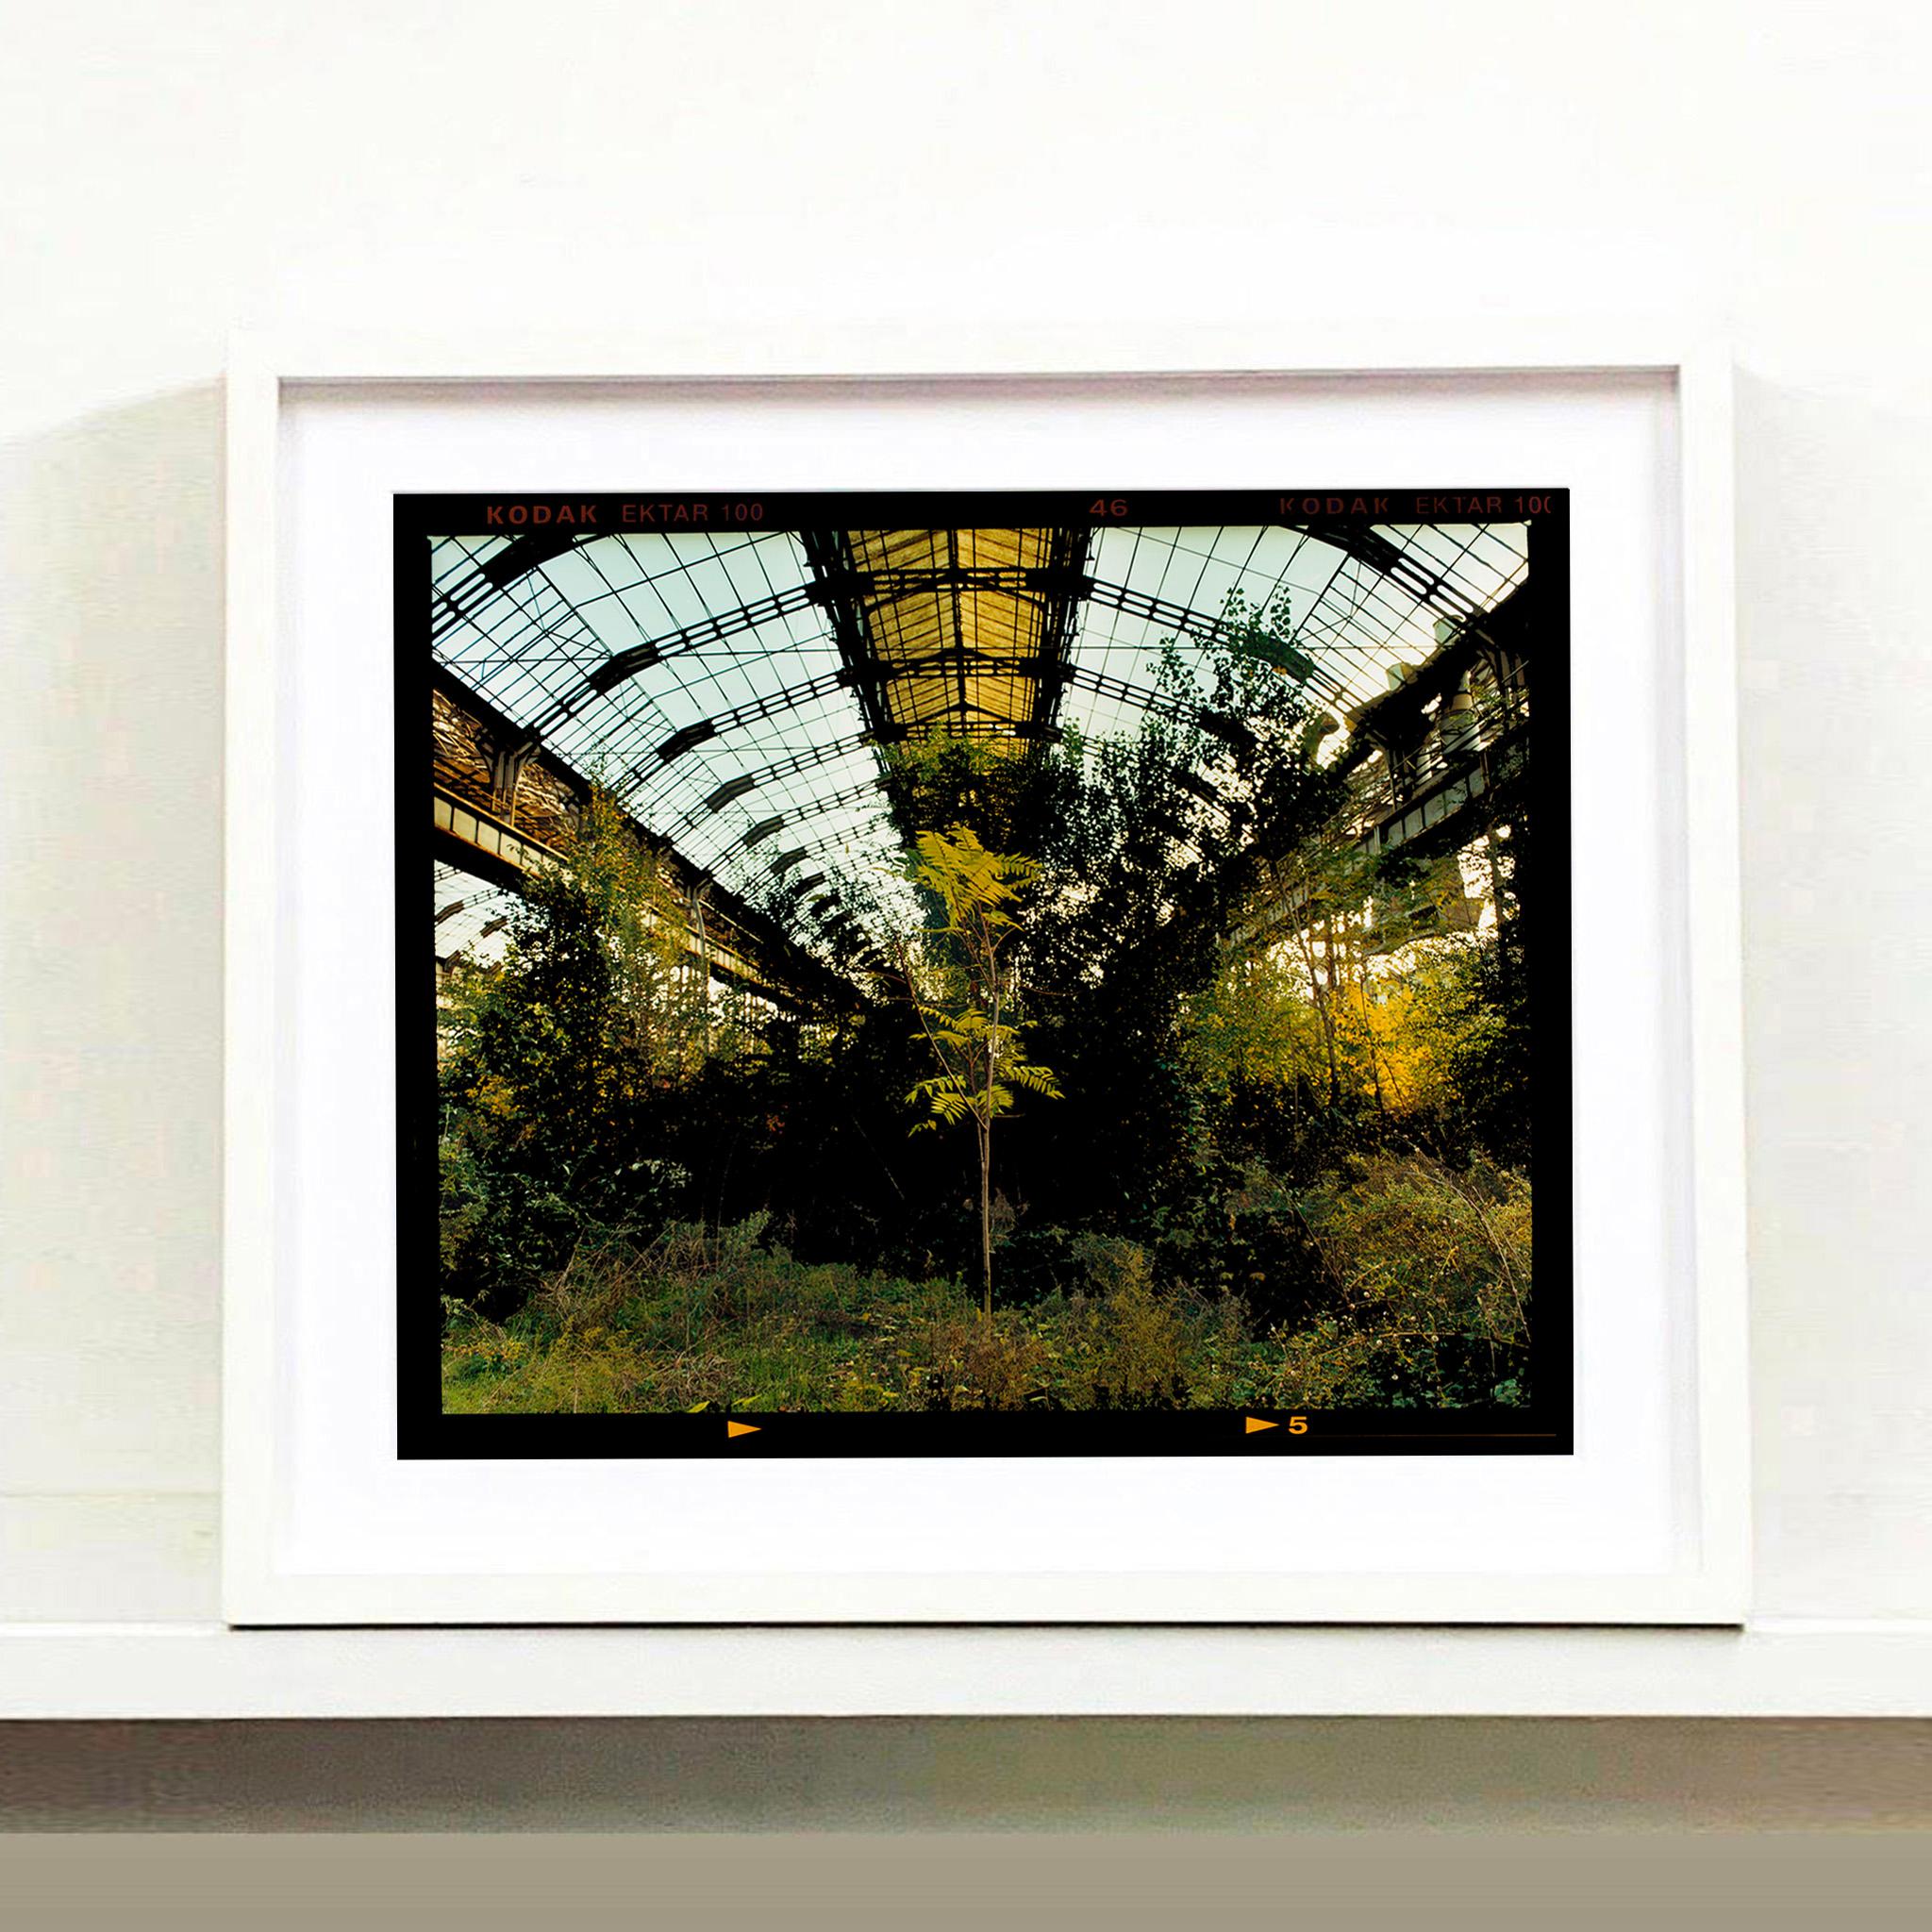 Industrial Jungle, Milan - Italian industrial architecture photography - Contemporary Print by Richard Heeps